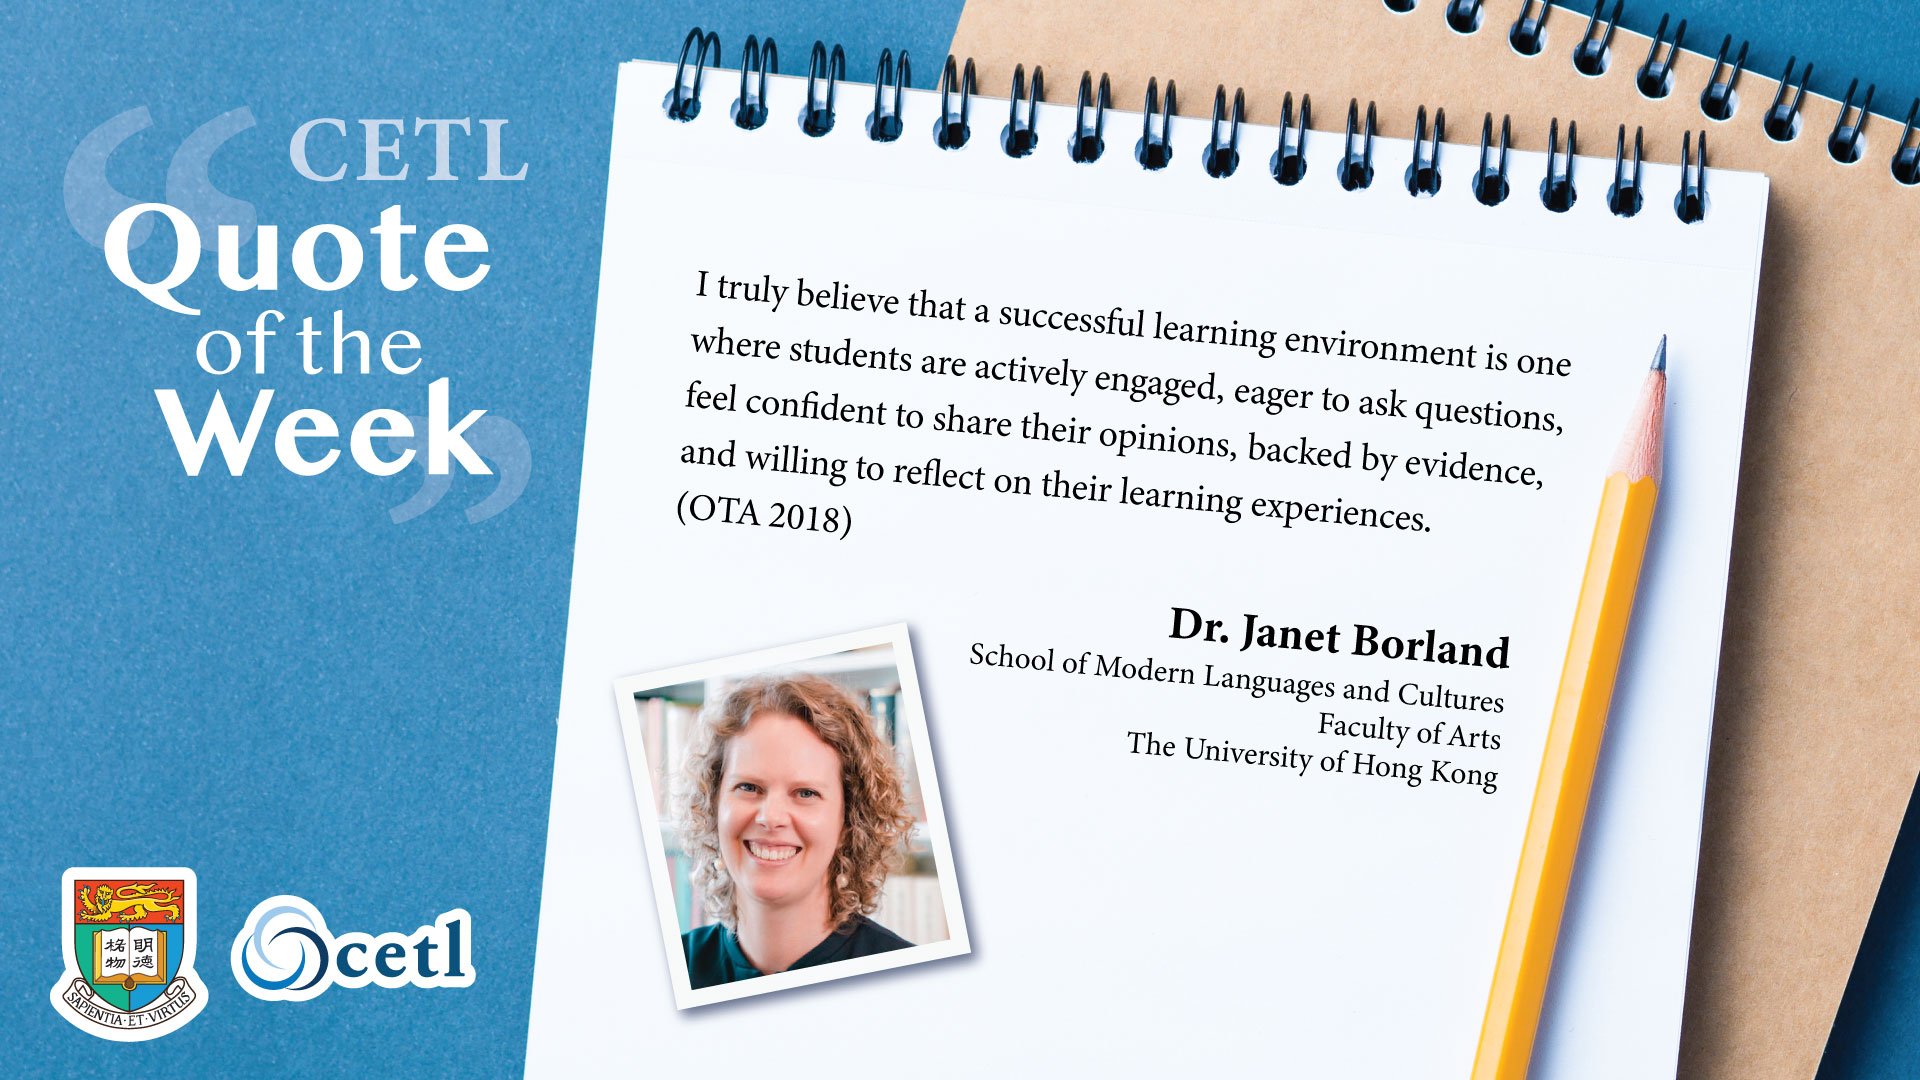 Dr. Janet Borland - I truly believe that a successful learning environment is one where students are actively engaged, eager to ask questions, feel confident to share their opinions, backed by evidence, and willing to reflect on their learning experiences.